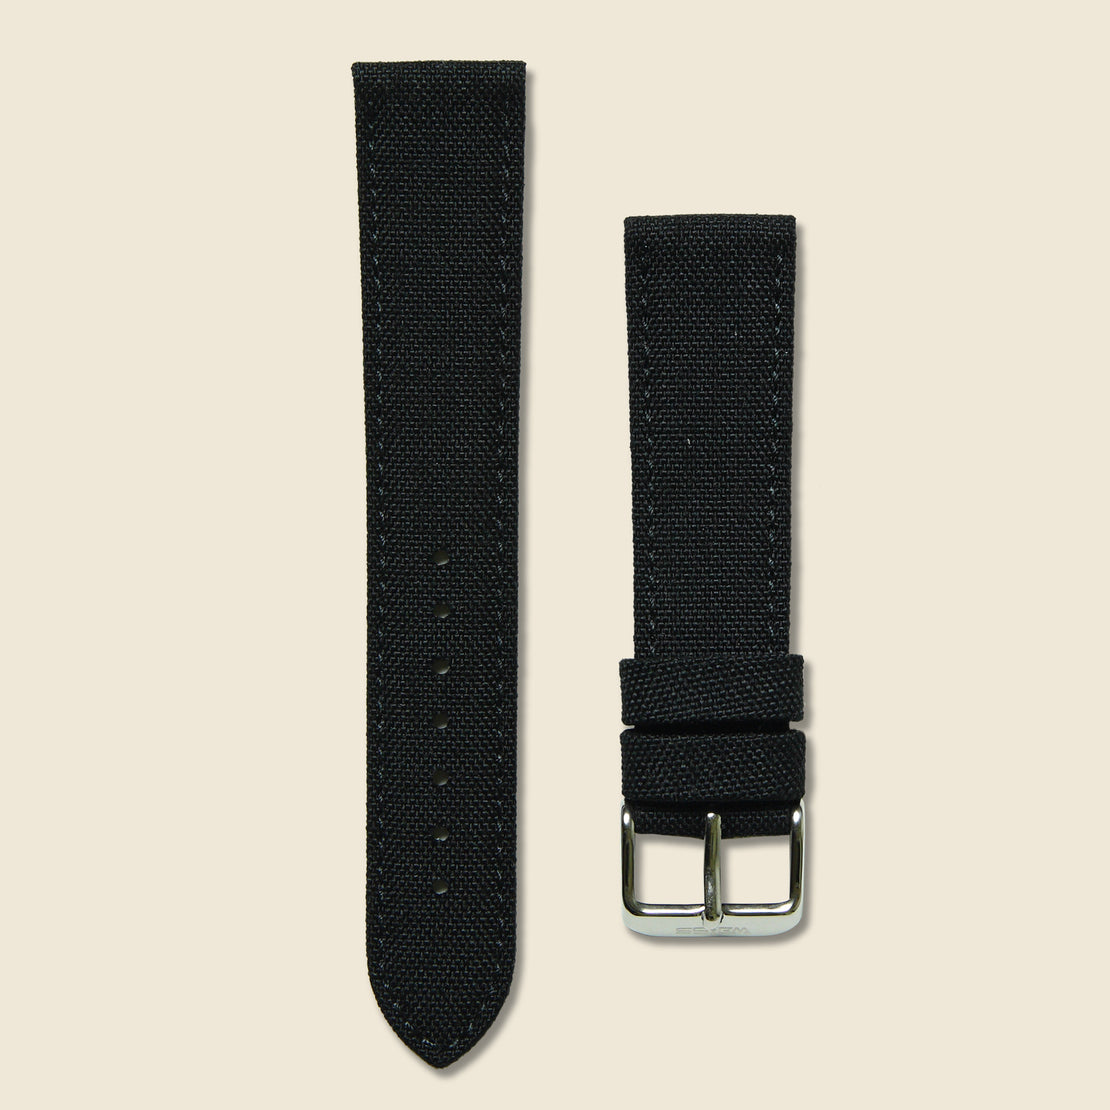 Weiss Watch Co Canvas Watch Band - Black